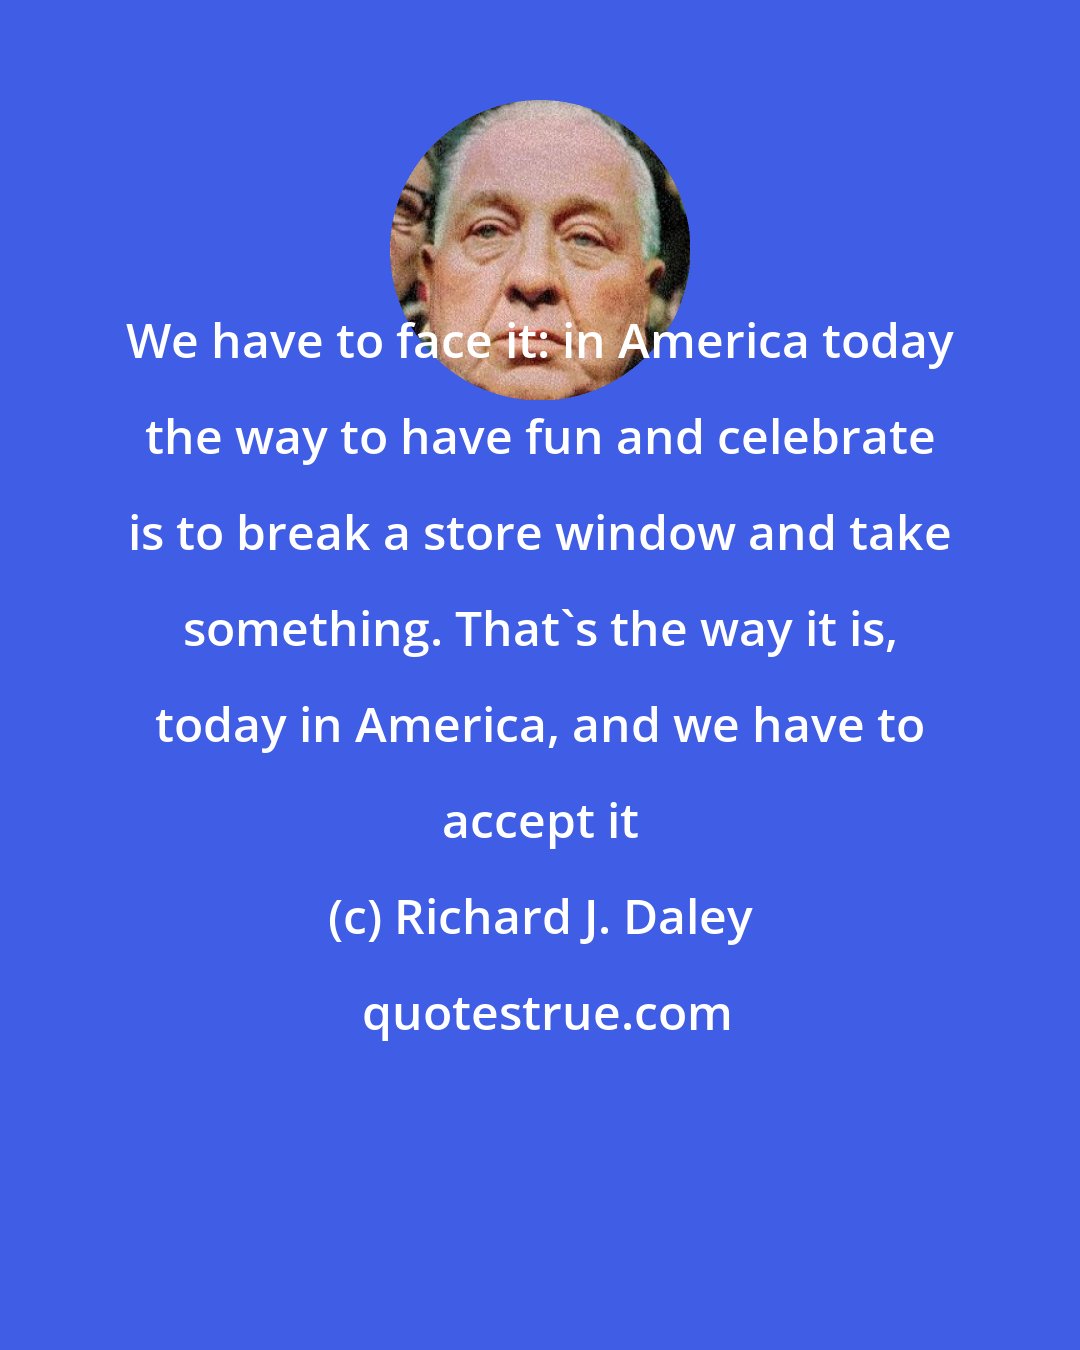 Richard J. Daley: We have to face it: in America today the way to have fun and celebrate is to break a store window and take something. That's the way it is, today in America, and we have to accept it